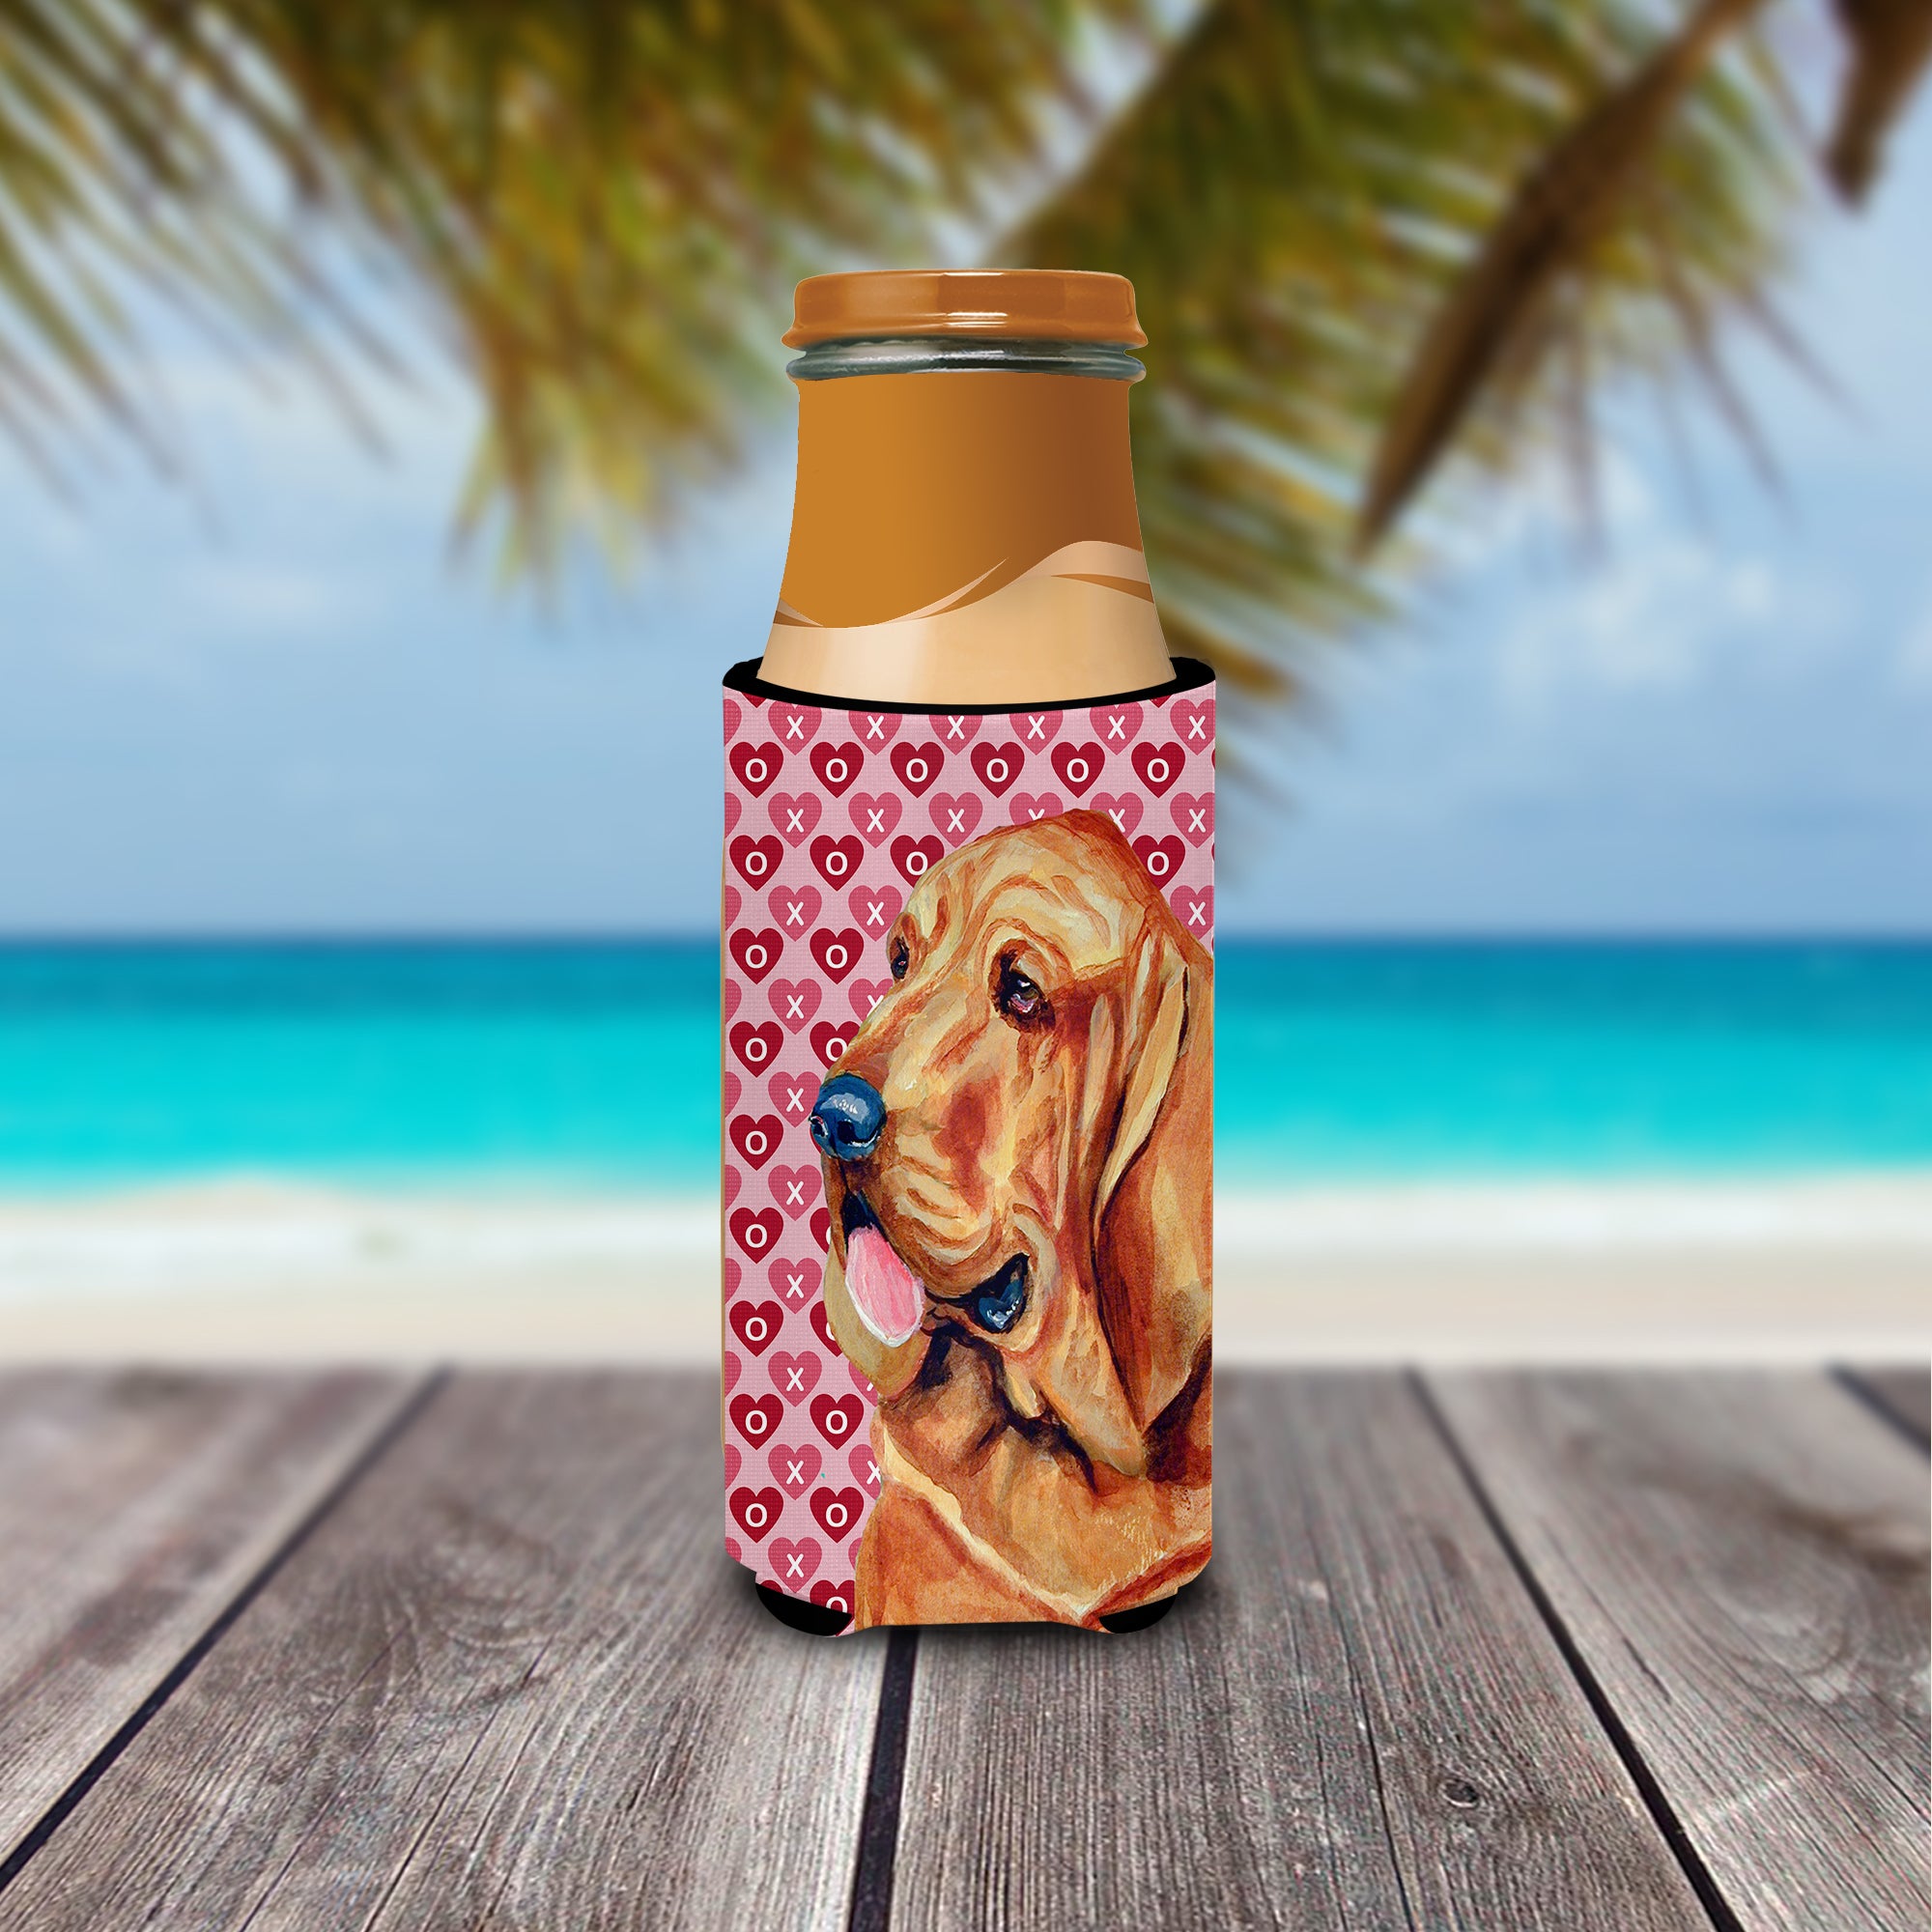 Bloodhound Hearts Love and Valentine's Day Portrait Ultra Beverage Insulators for slim cans LH9151MUK.